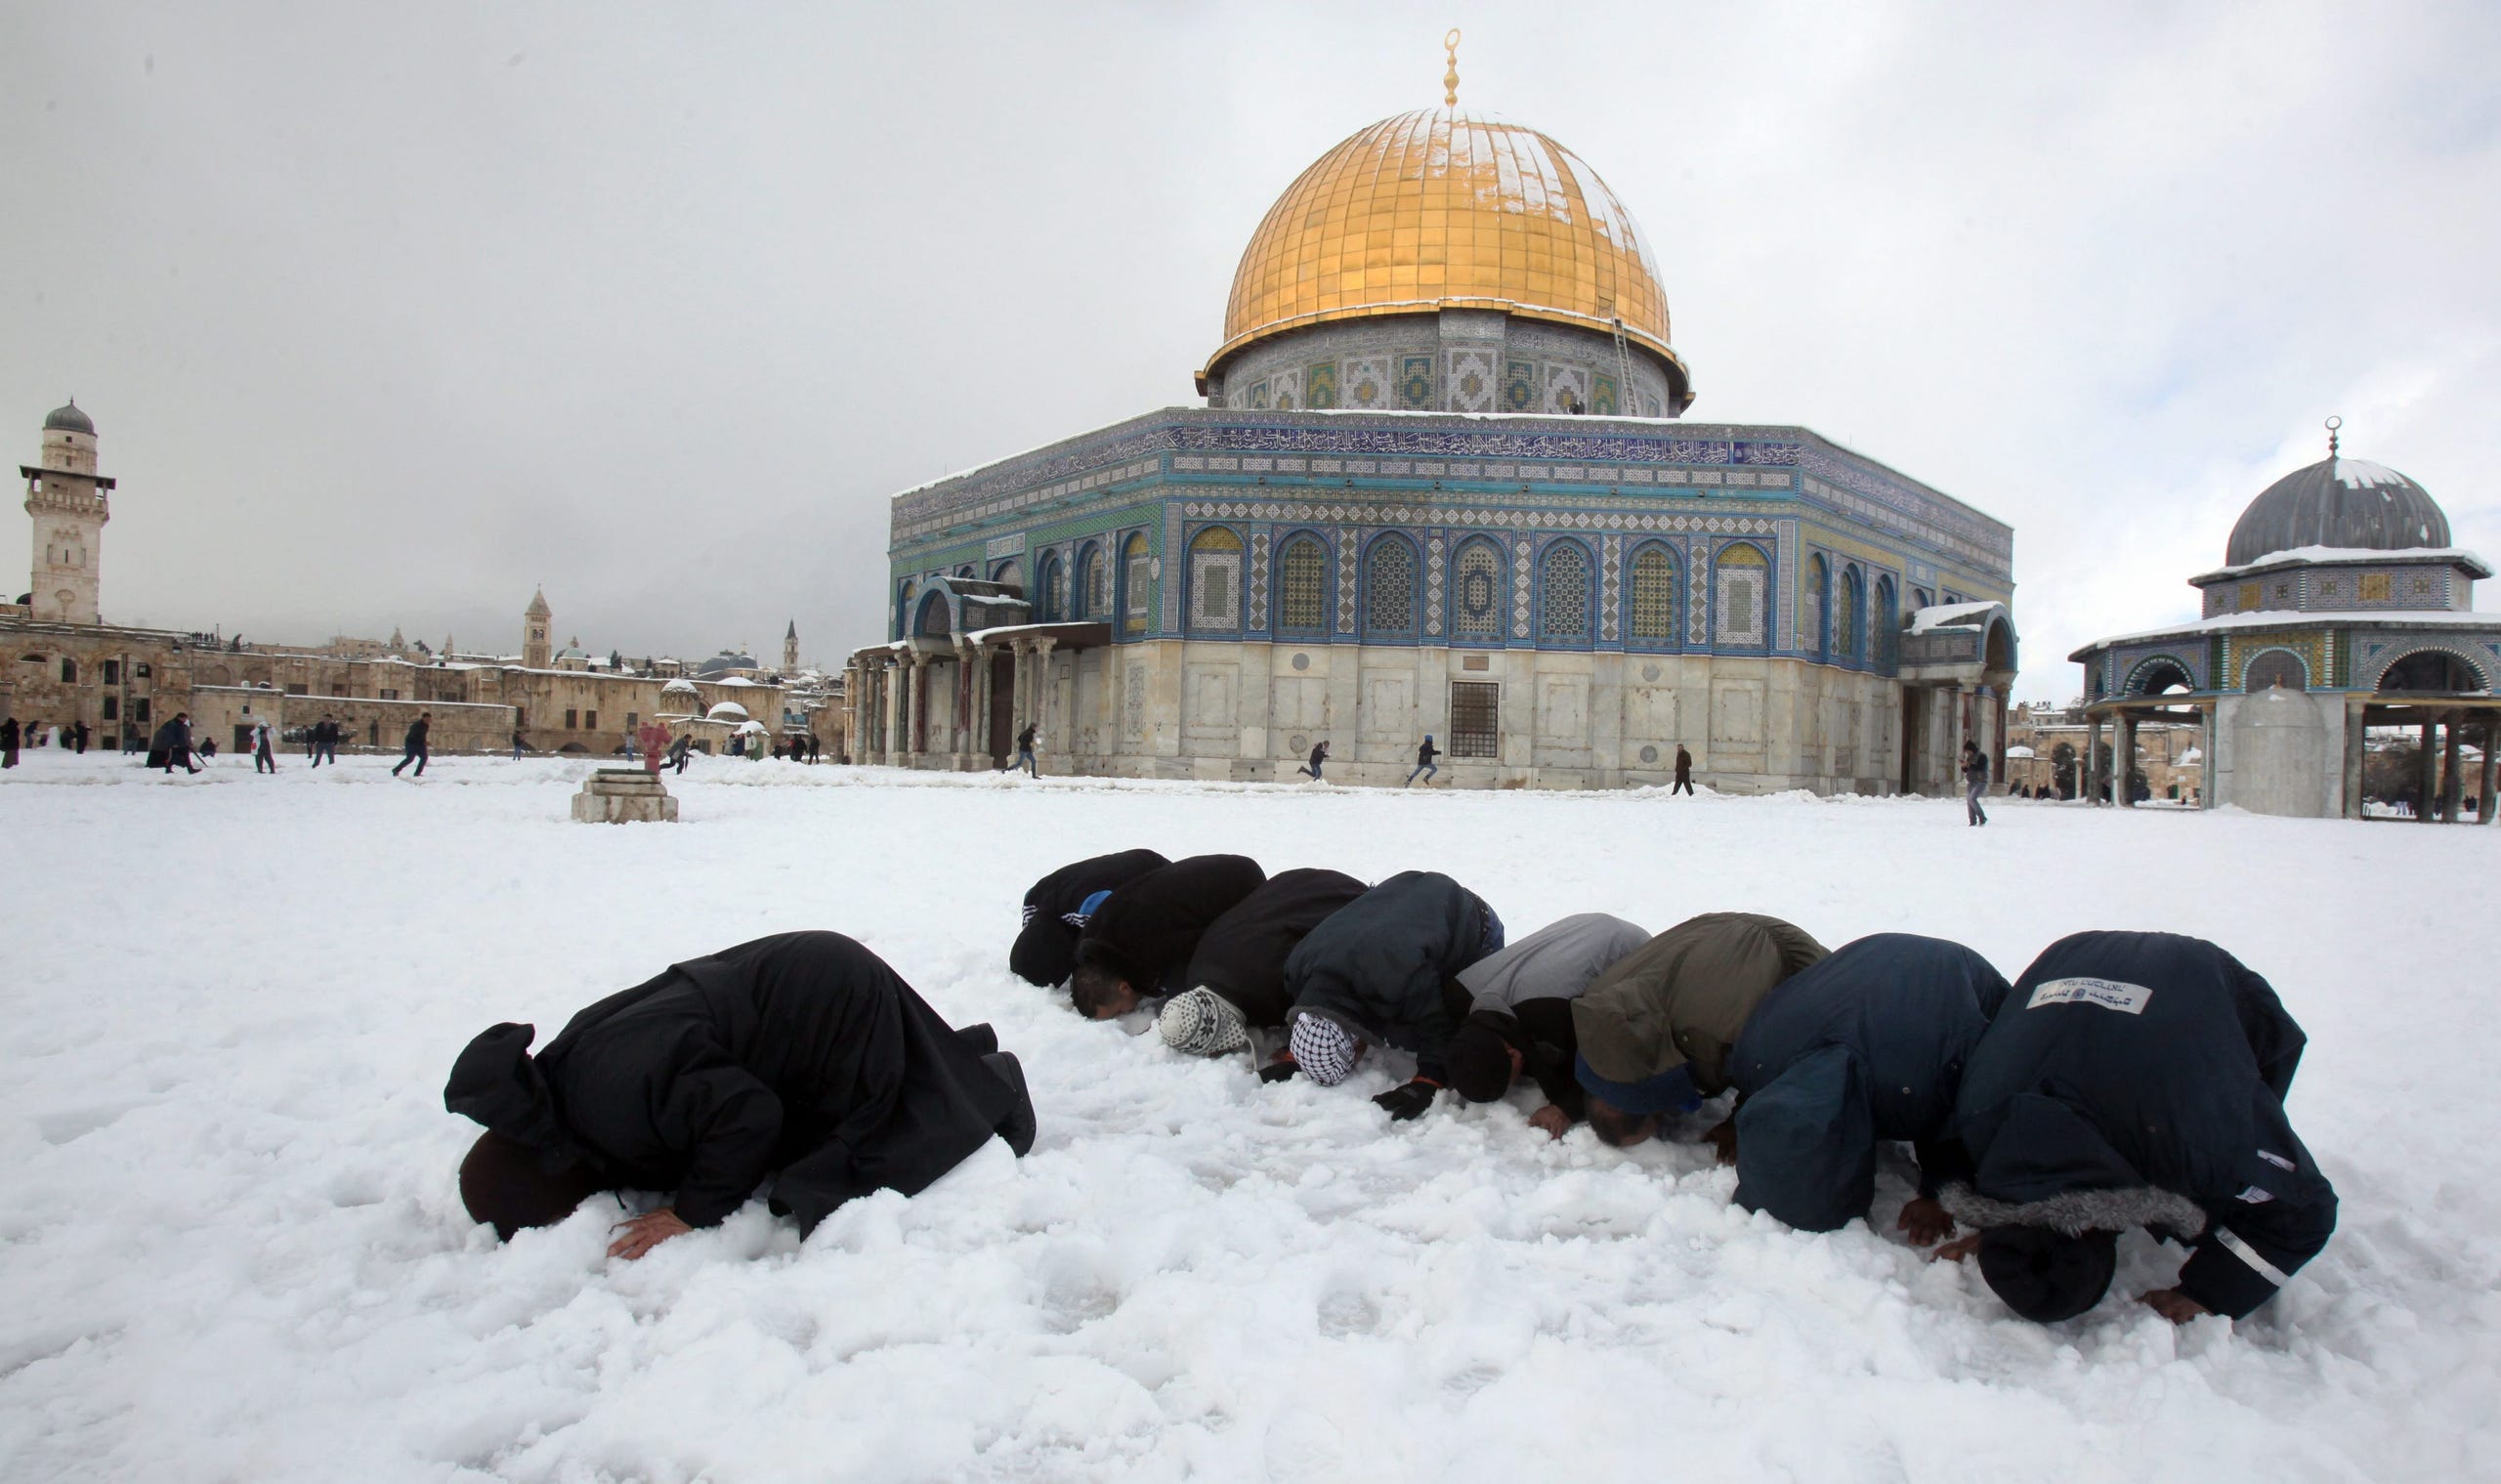 Palestinians pray on the plaza of the Dome of the Rock in Jerusalem following a snow storm on Feb. 20.